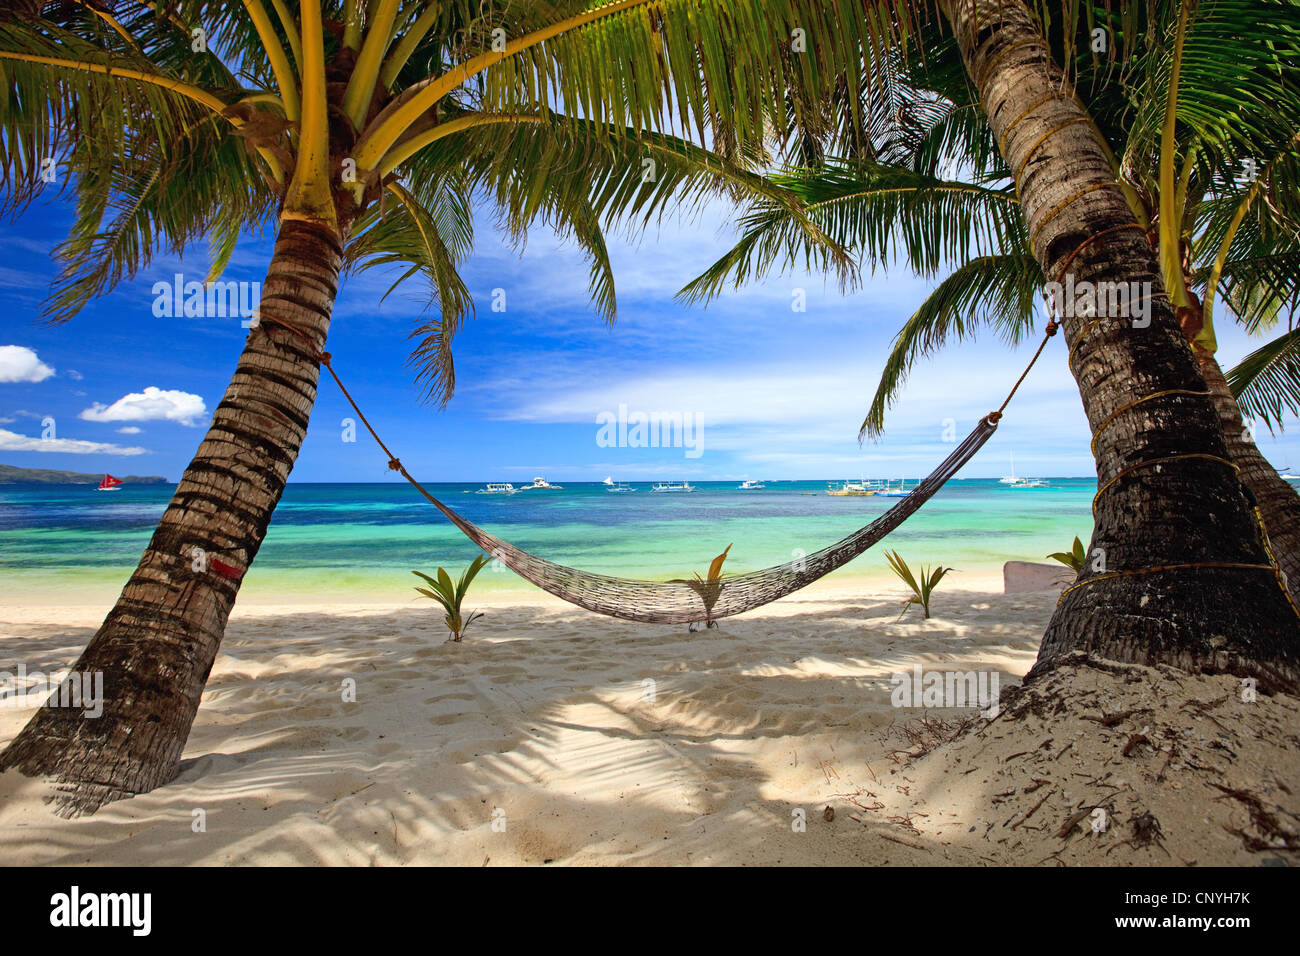 hammock between two palm trees at tropical beach, Philippines, Boracay Stock Photo